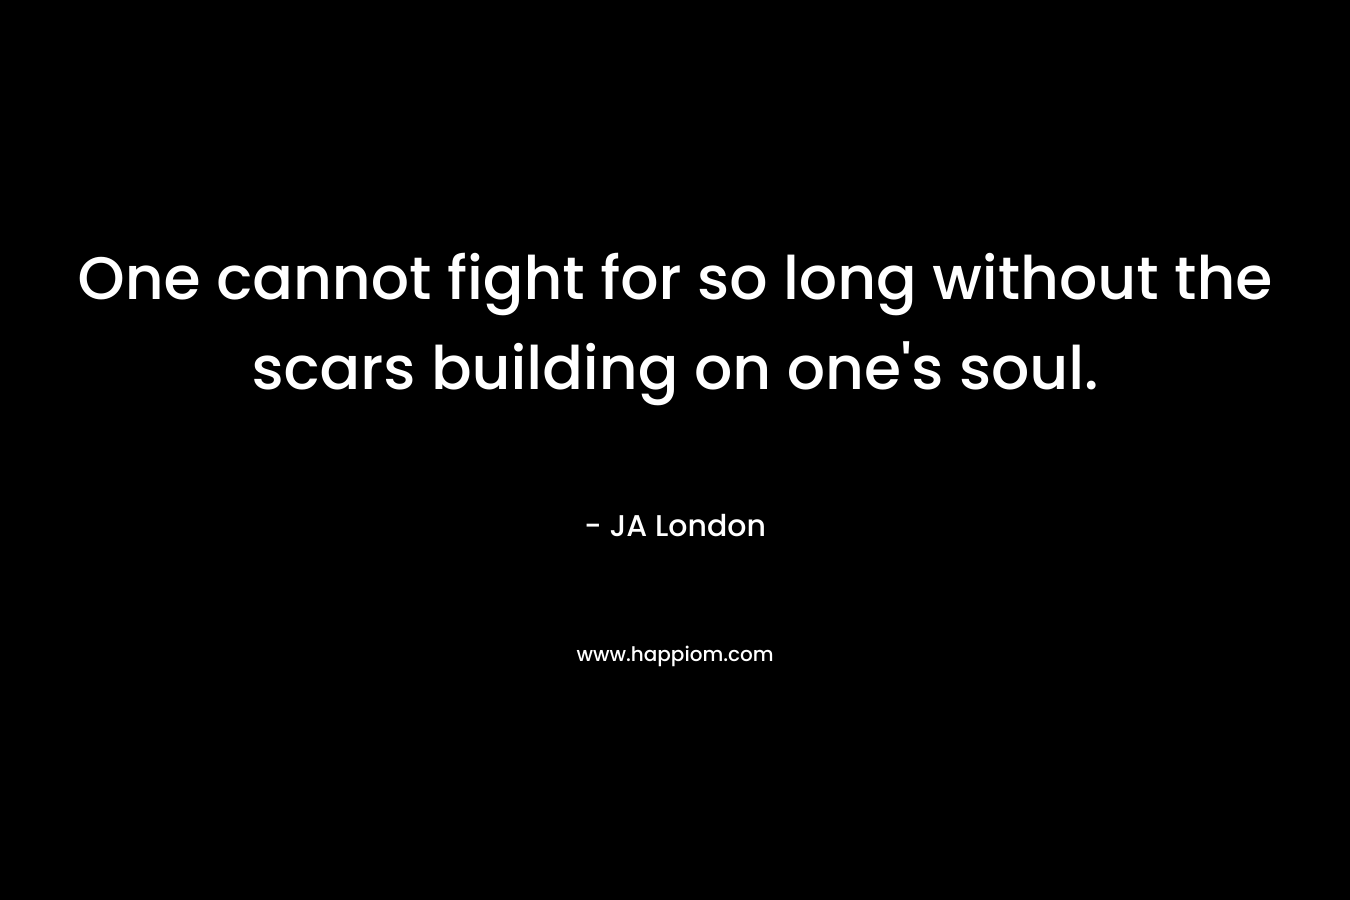 One cannot fight for so long without the scars building on one’s soul. – JA London